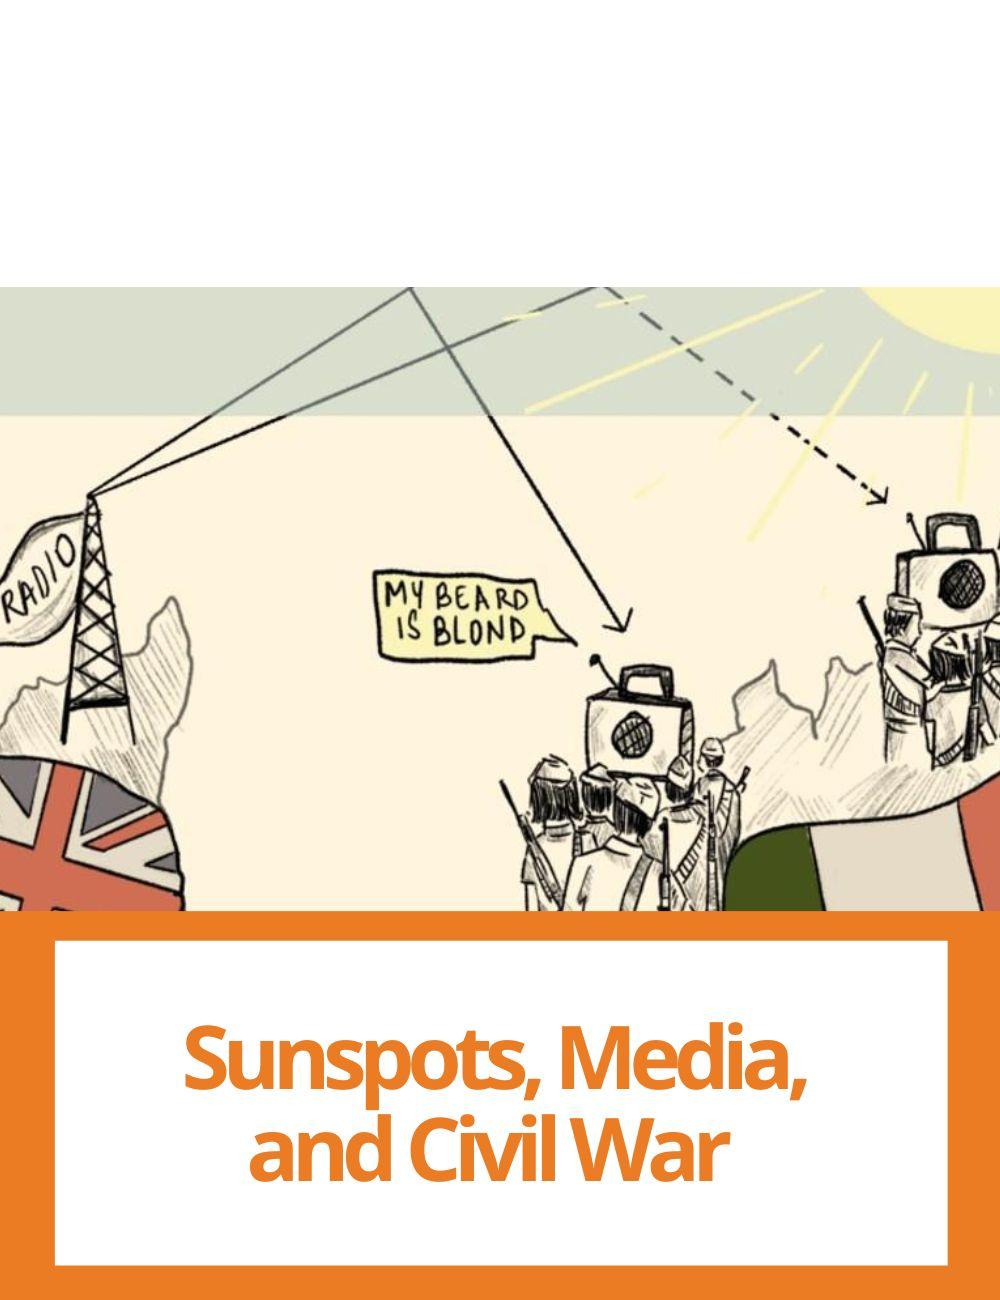 Link to related stories. Illustration: relation between sunspots and radio. Story headline: How Sunspots Help Us Understand the Role of Media in Resistance Movements